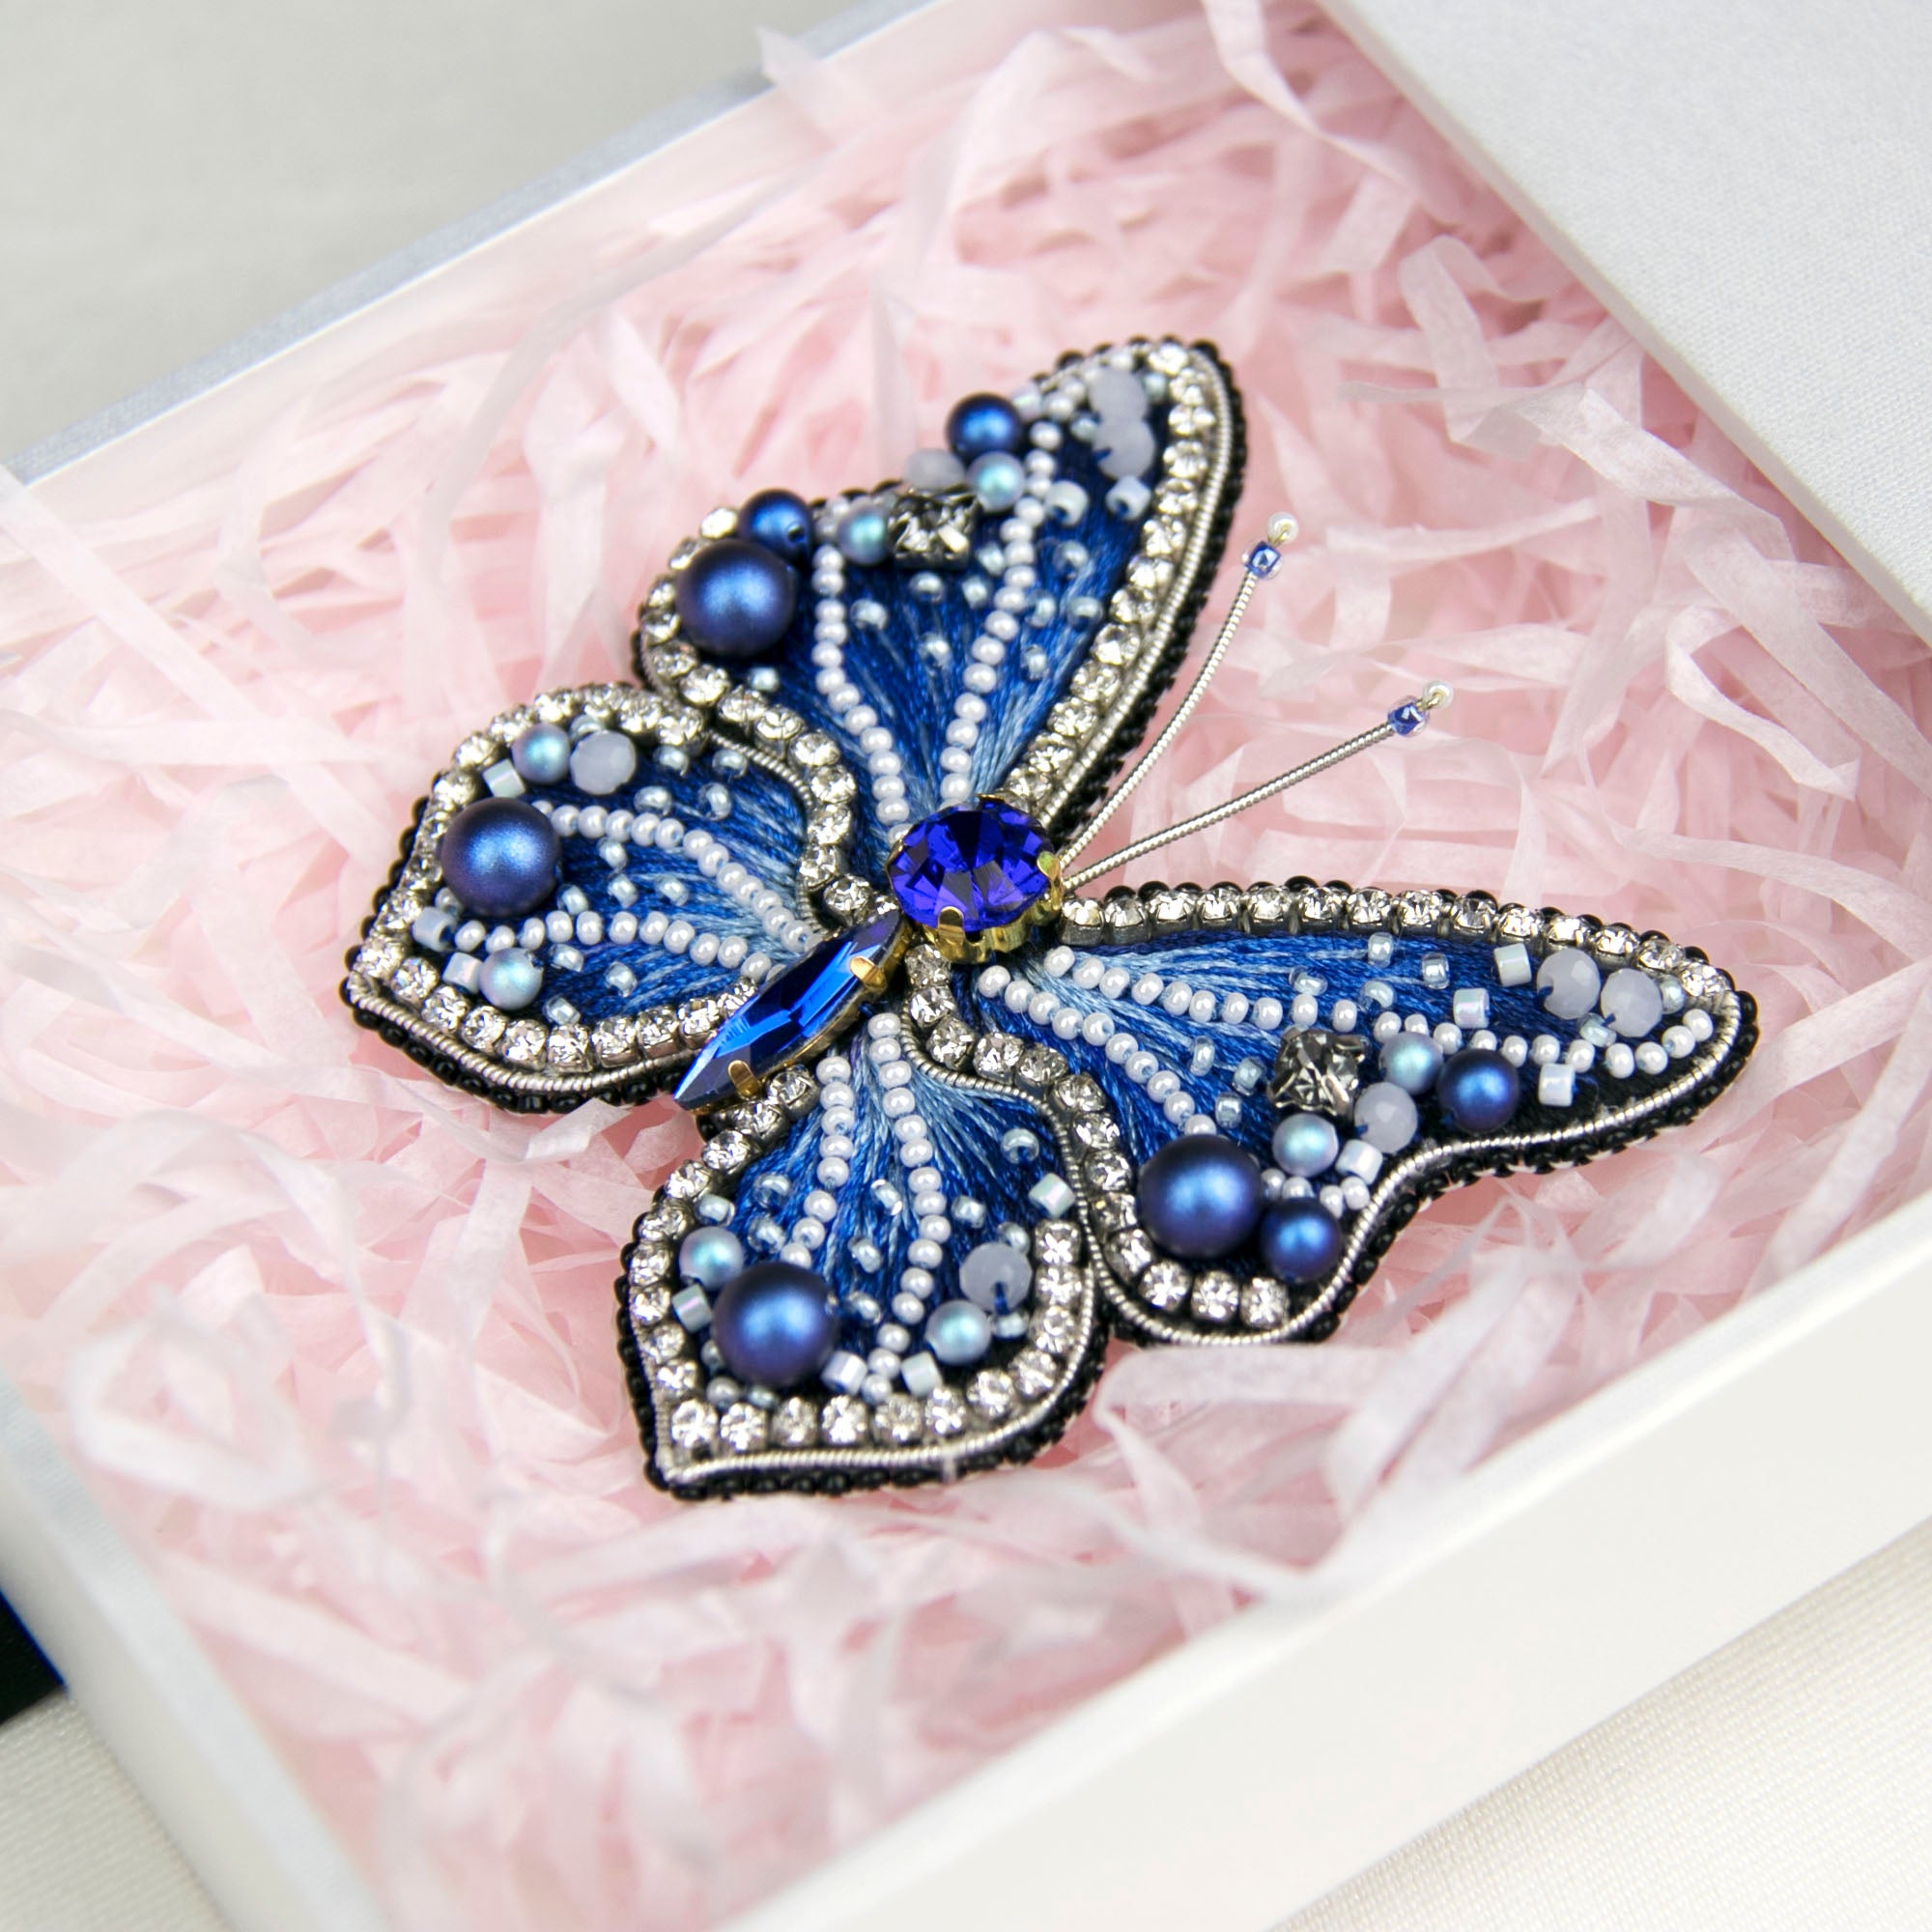 Sewing Needles Embroidery Brooch Craft Kits-Blue Butterfly